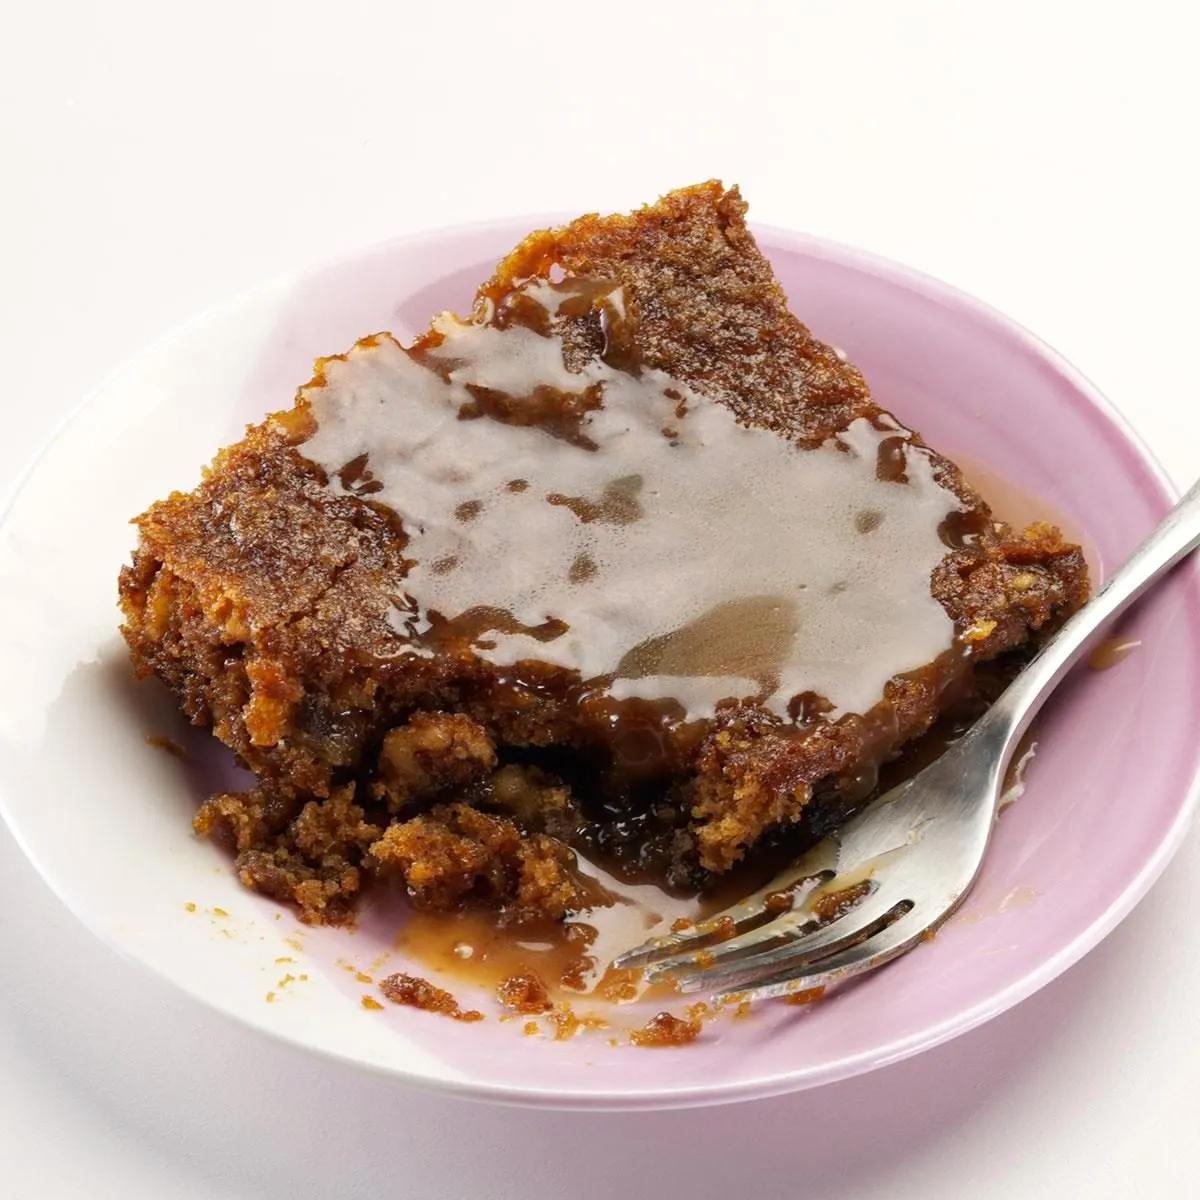 Warm Sticky Toffee Pudding Recipe: How to Make It